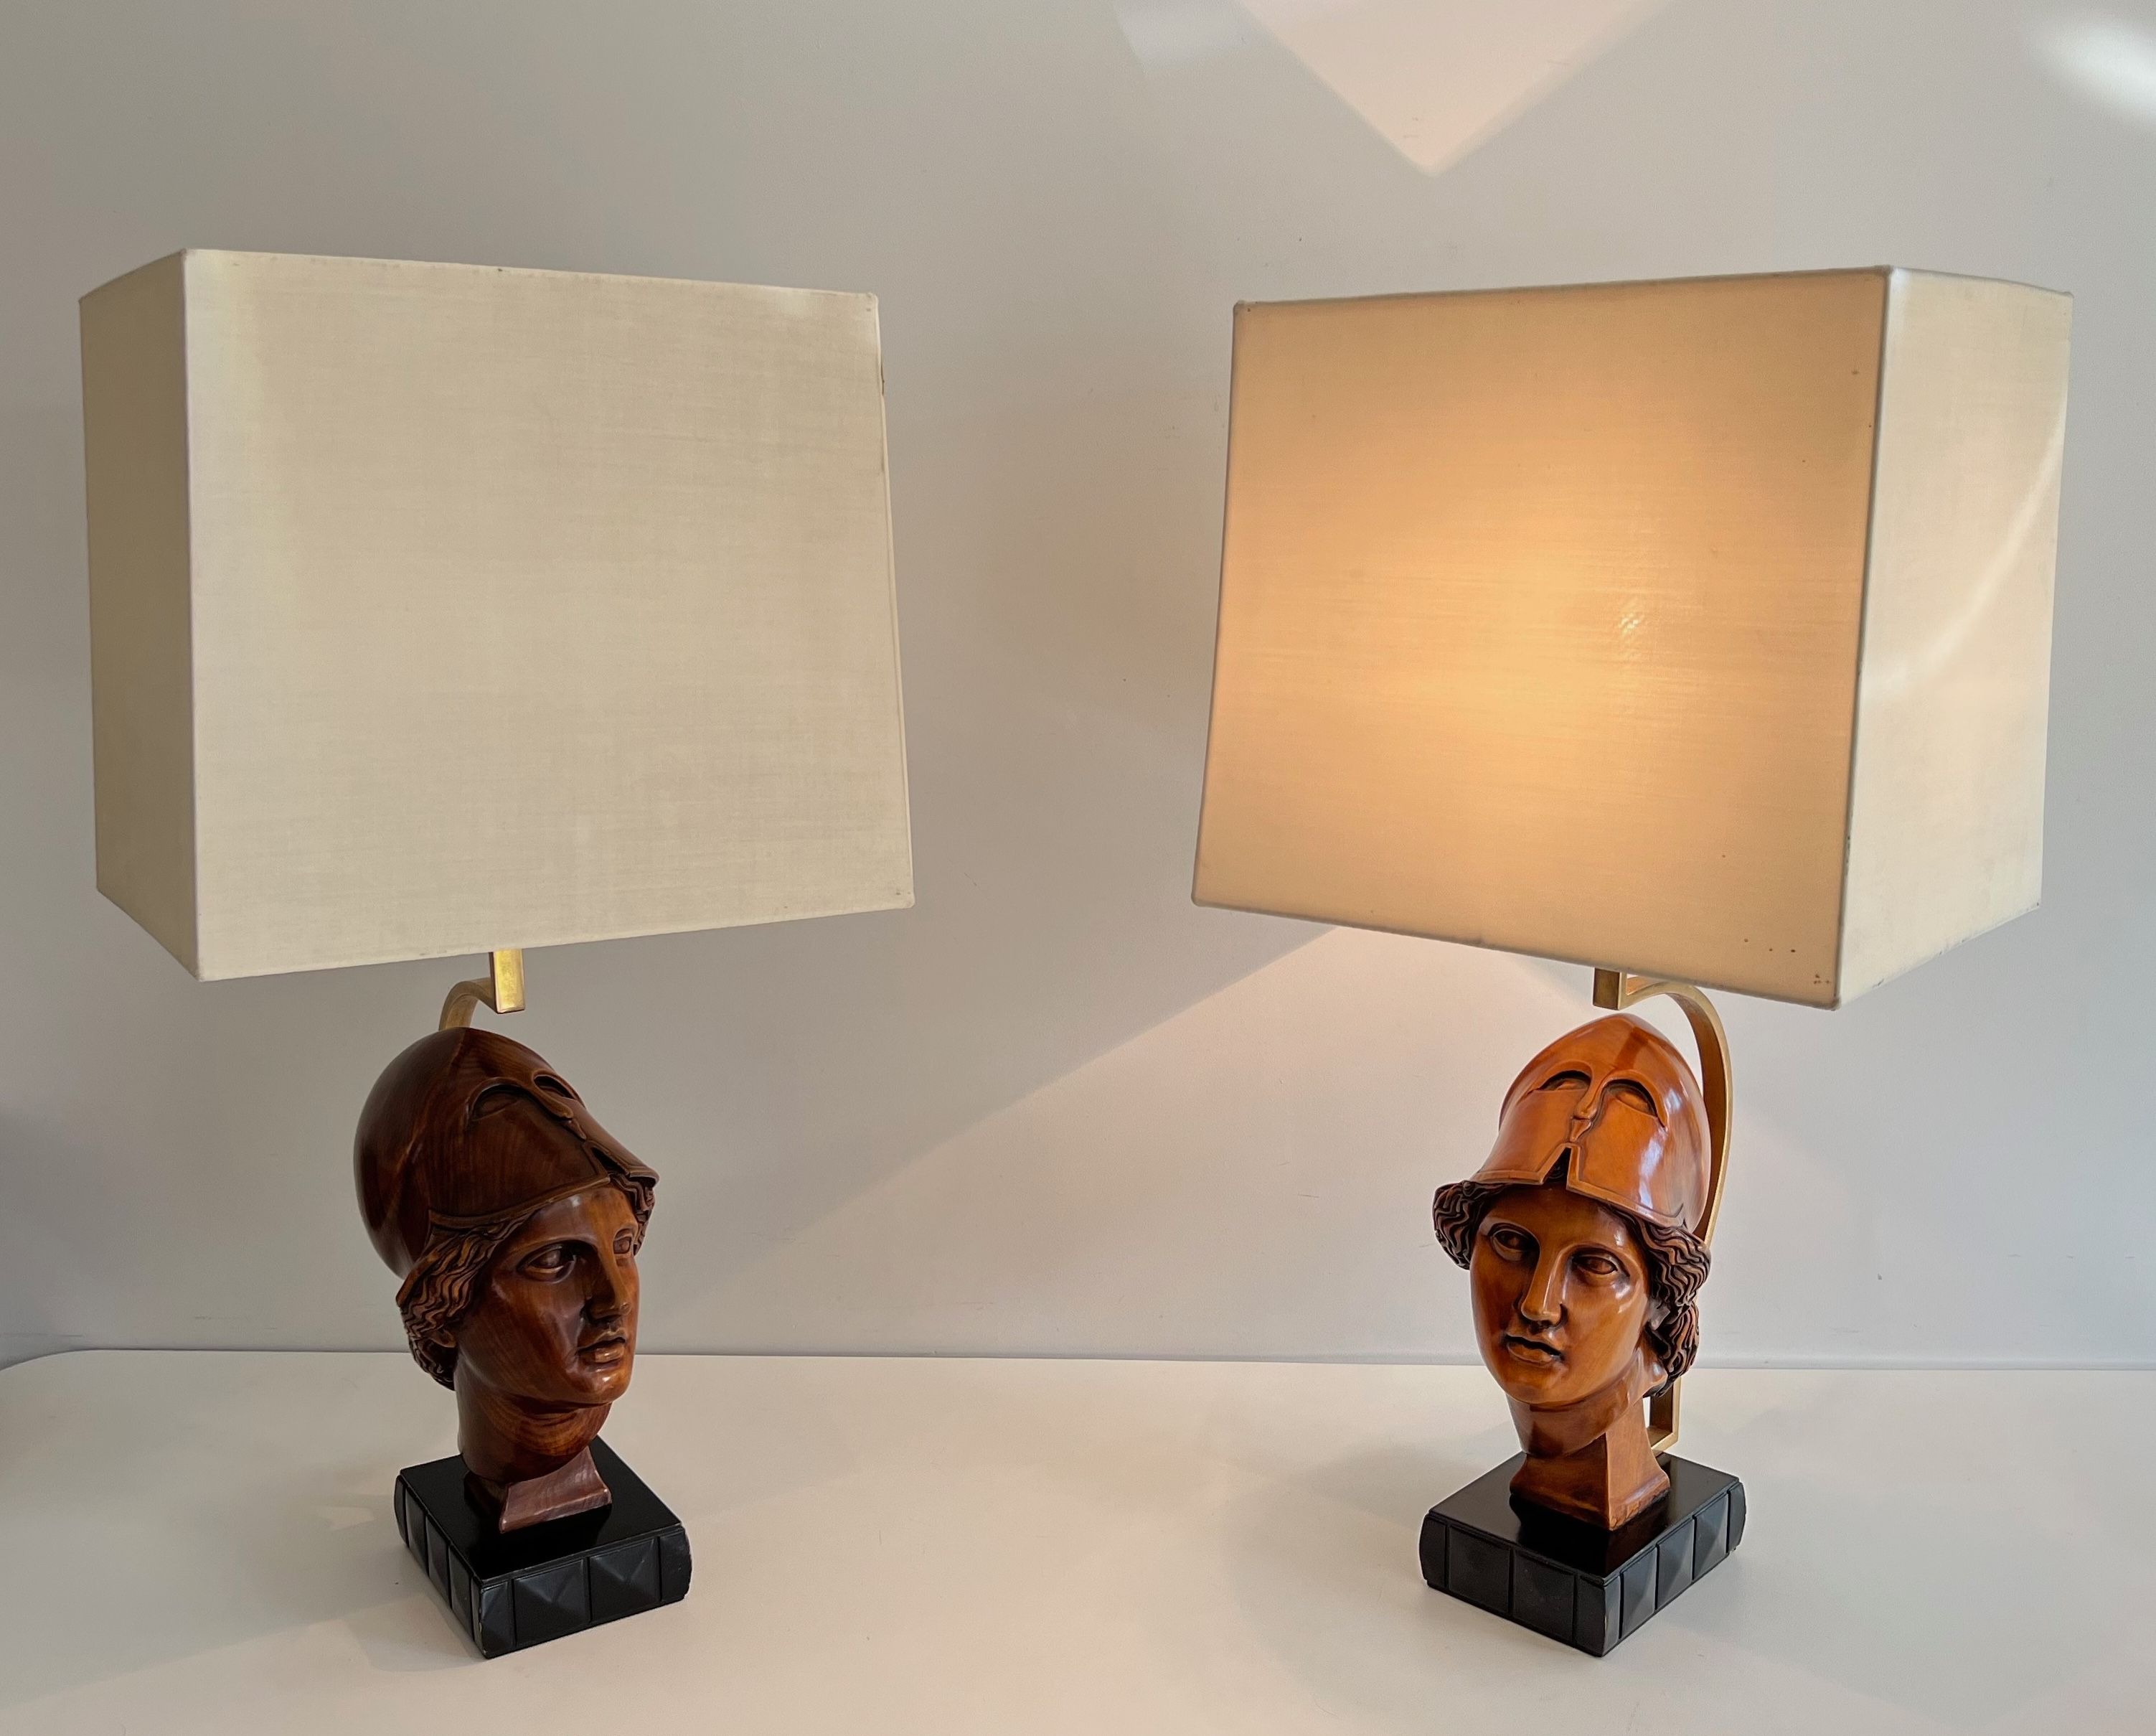 Pair of Walnut Table Lamps representing the Faces of Helmeted Soldiers